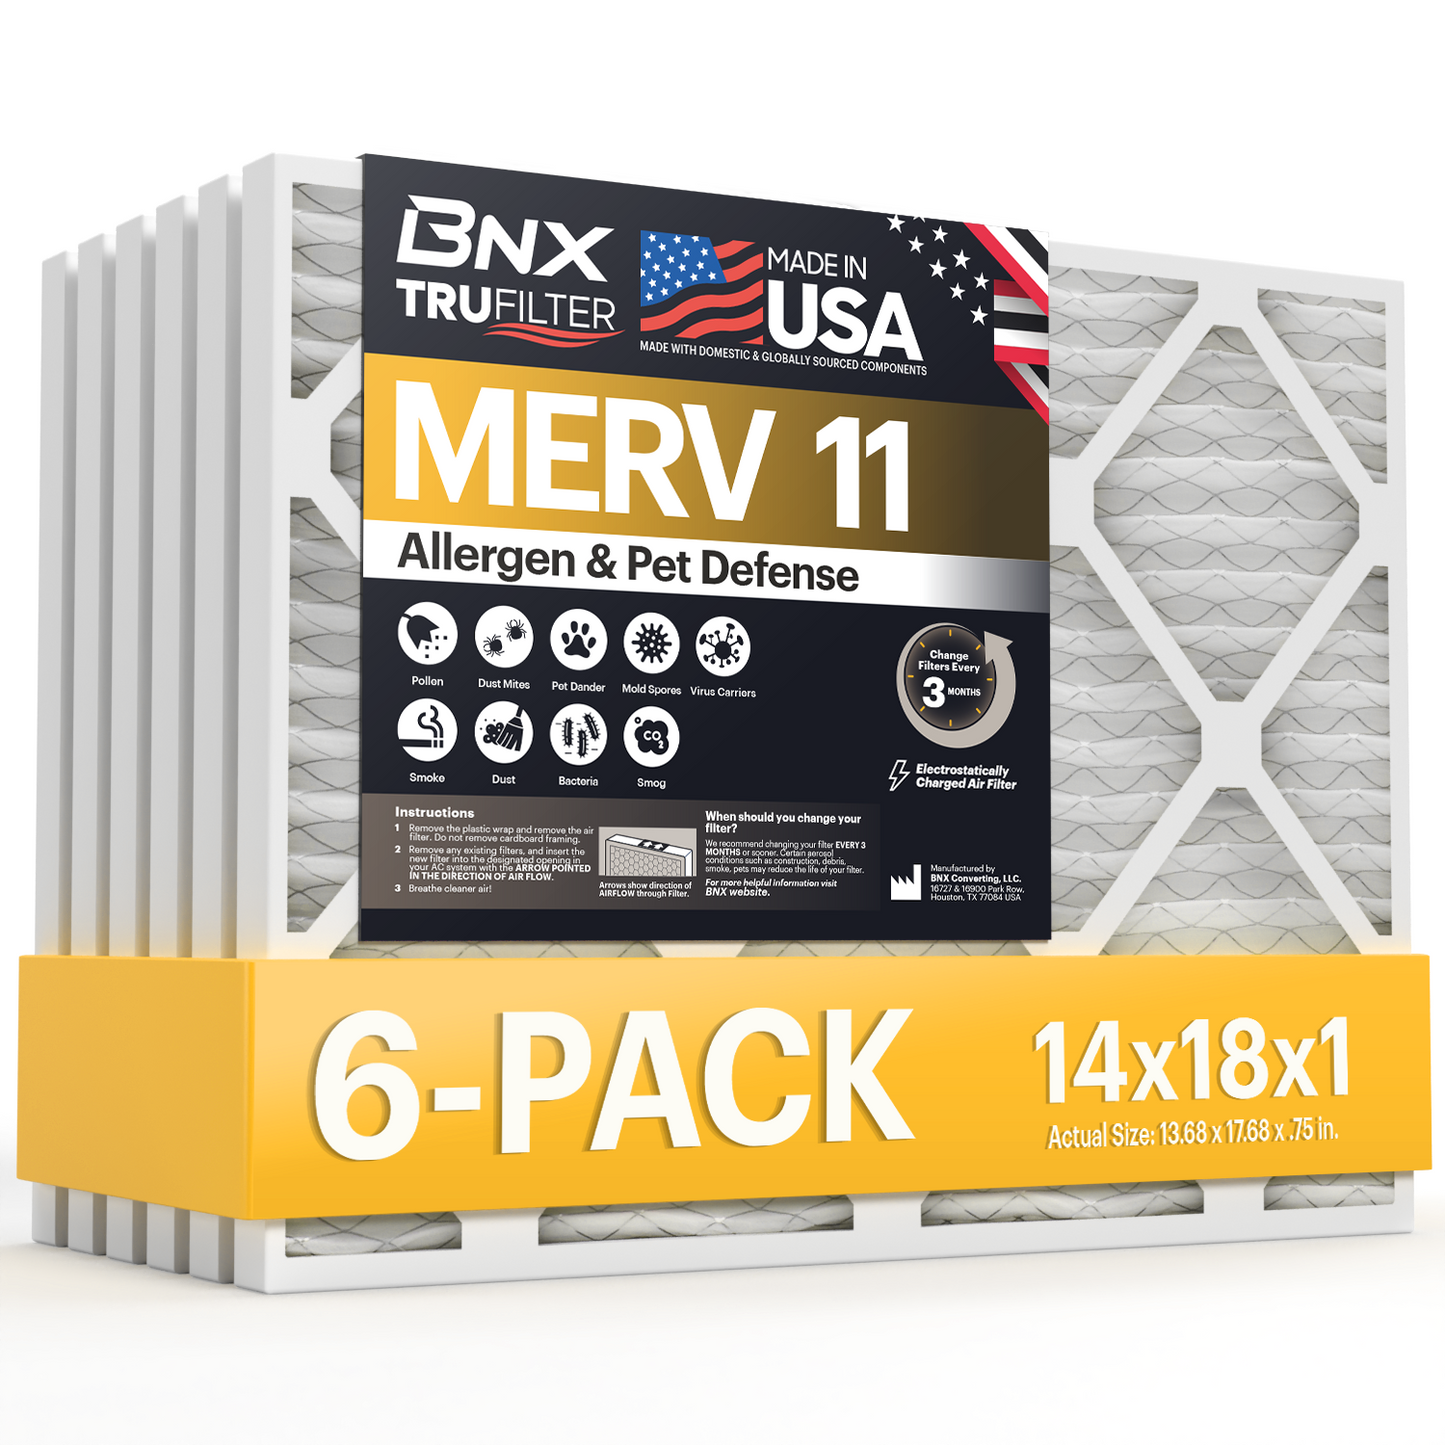 BNX TruFilter 14x18x1 MERV 11 Pleated Air Filter – Made in USA (6-Pack)